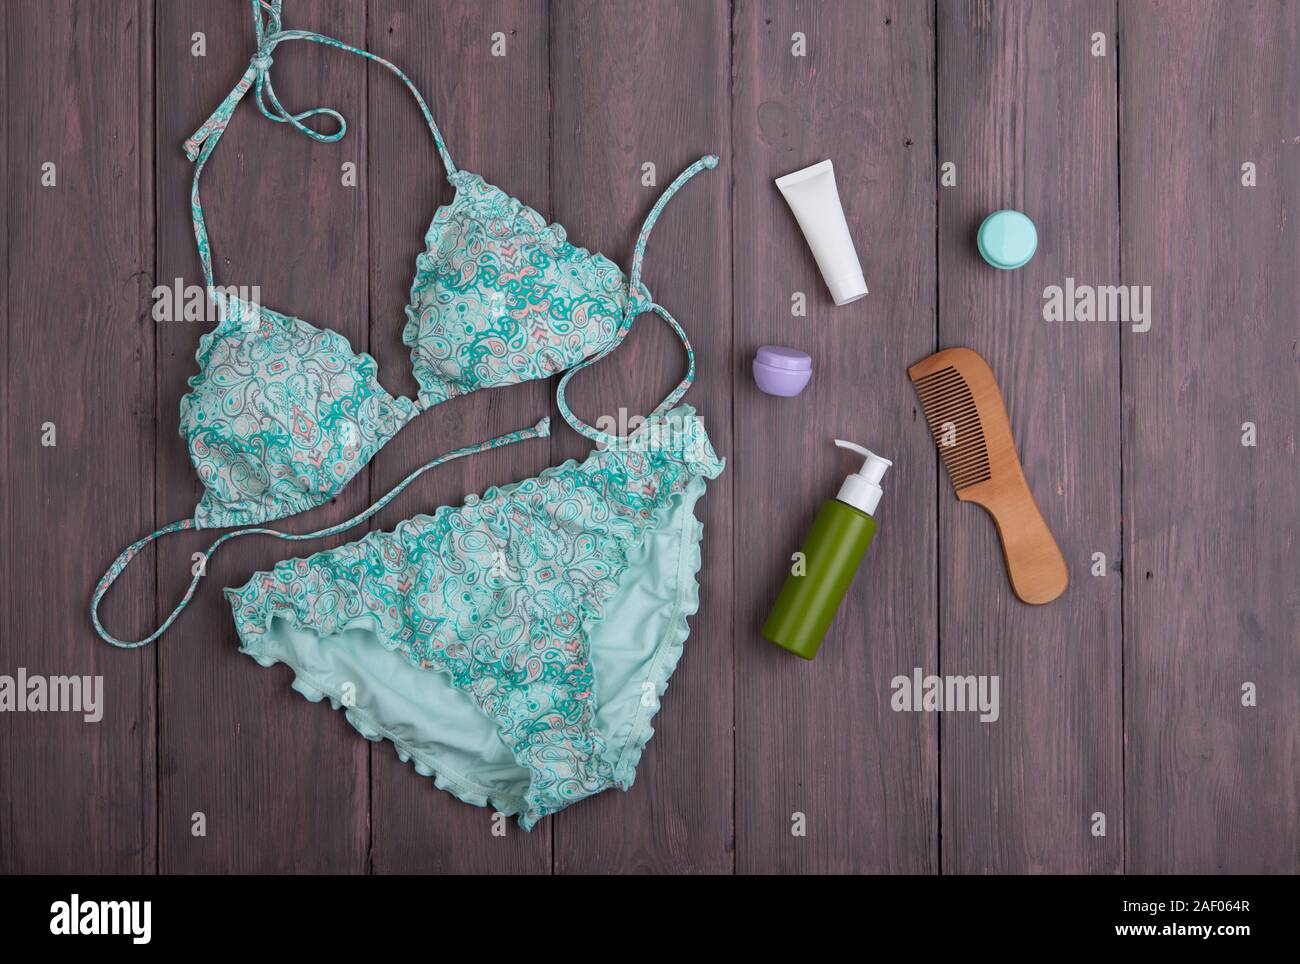 Sea holidays / travel concept - blue beautiful swimsuit and accessories: wooden hairbrush, sunscreen, bottles with cream on wooden background Stock Photo